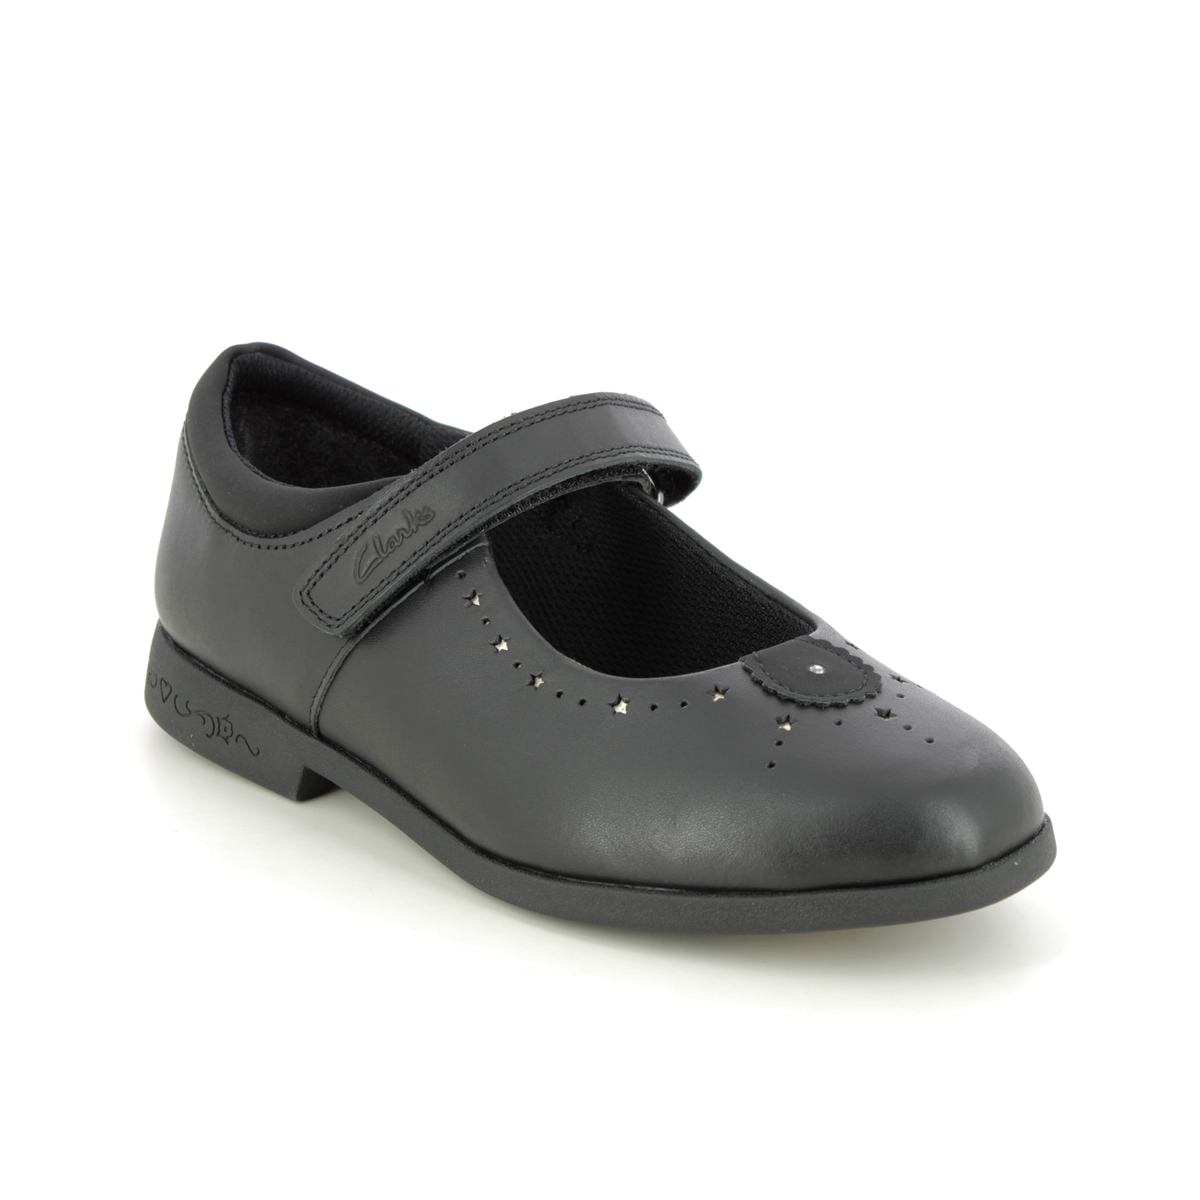 Clarks Magic Step Mj O Black Leather Kids Girls School Shoes 697057G In Size 2 In Plain Black Leather G Width Fitting For School For kids